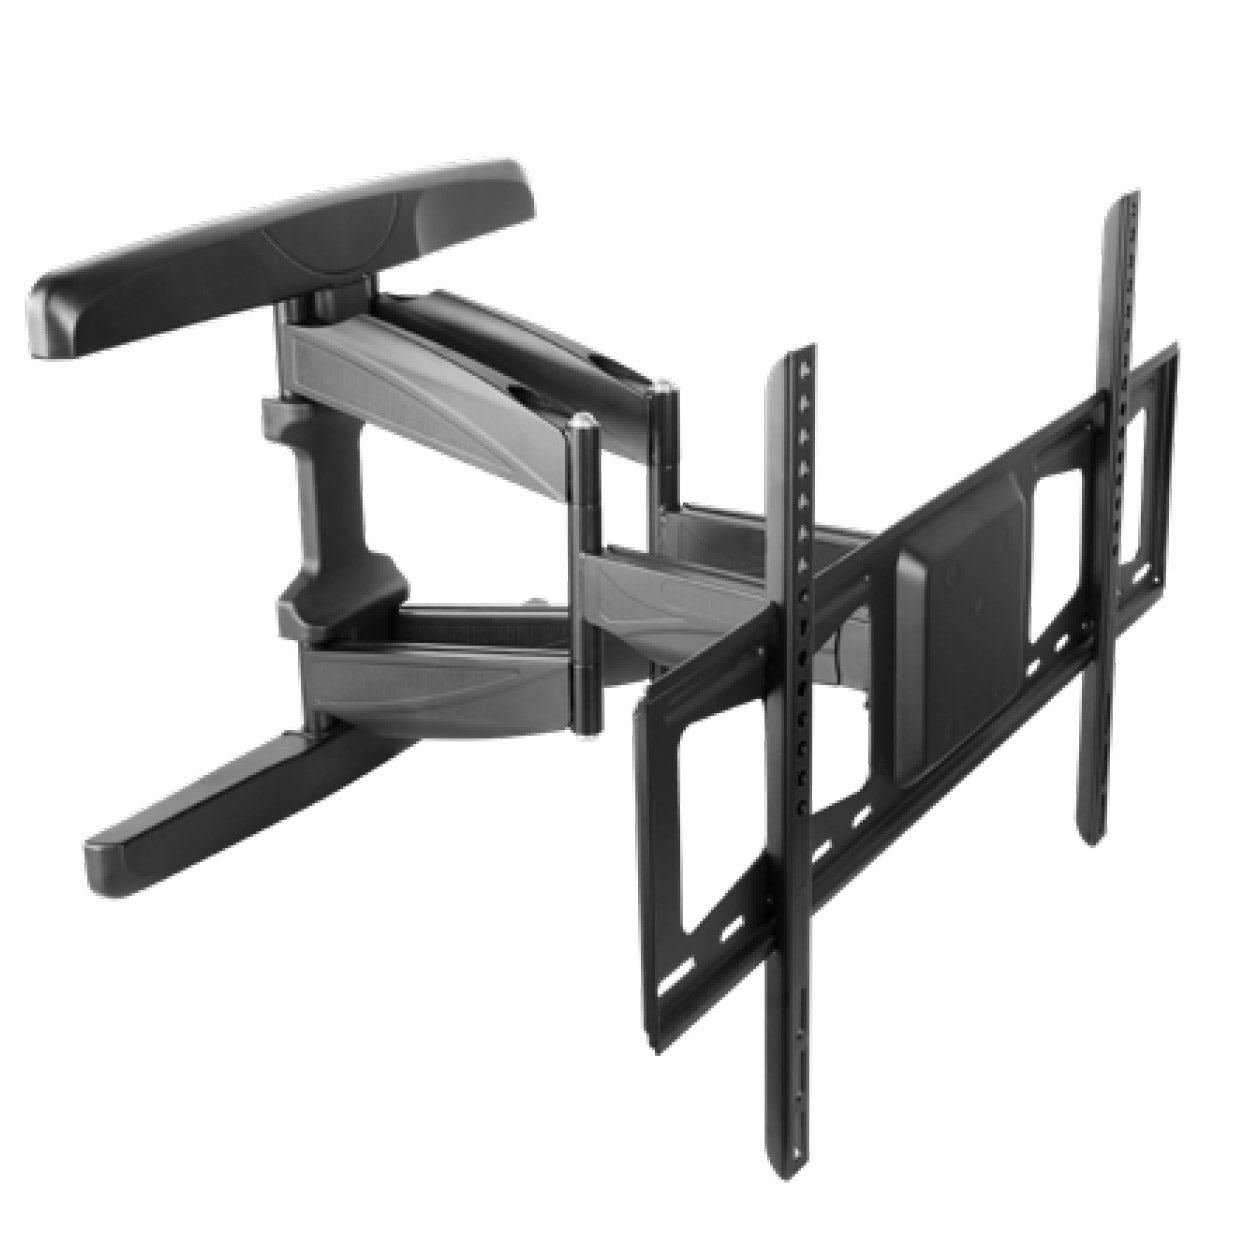 Syncmount SM-4270DMF | Articulating TV Wall mount 42" to 70" - Up to 99 lbs-Audio Video Centrale